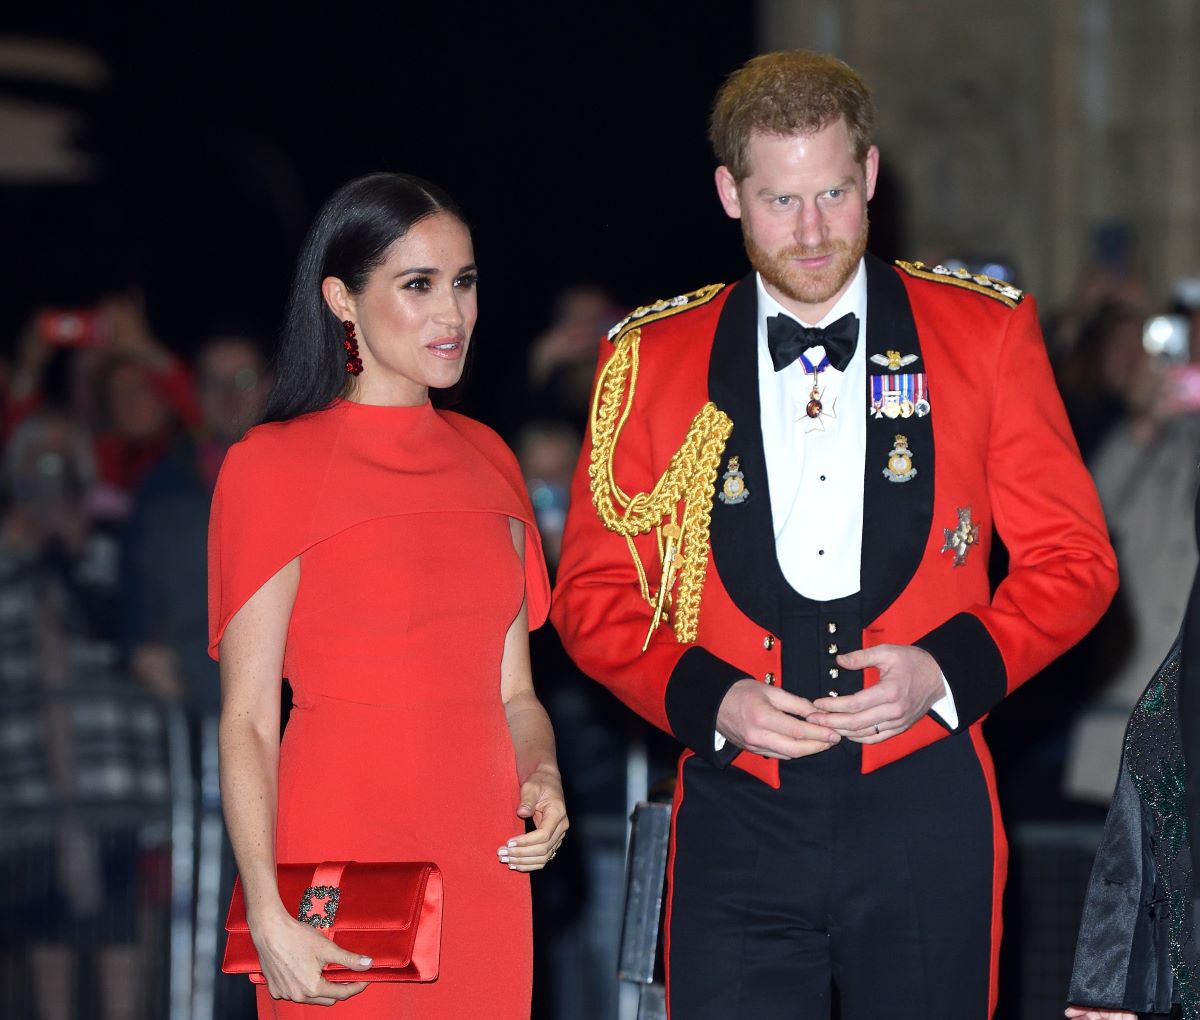 Prince Harry and Meghan Markle attend one of their final royal engagements at the Mountbatten Festival of Music in 2020